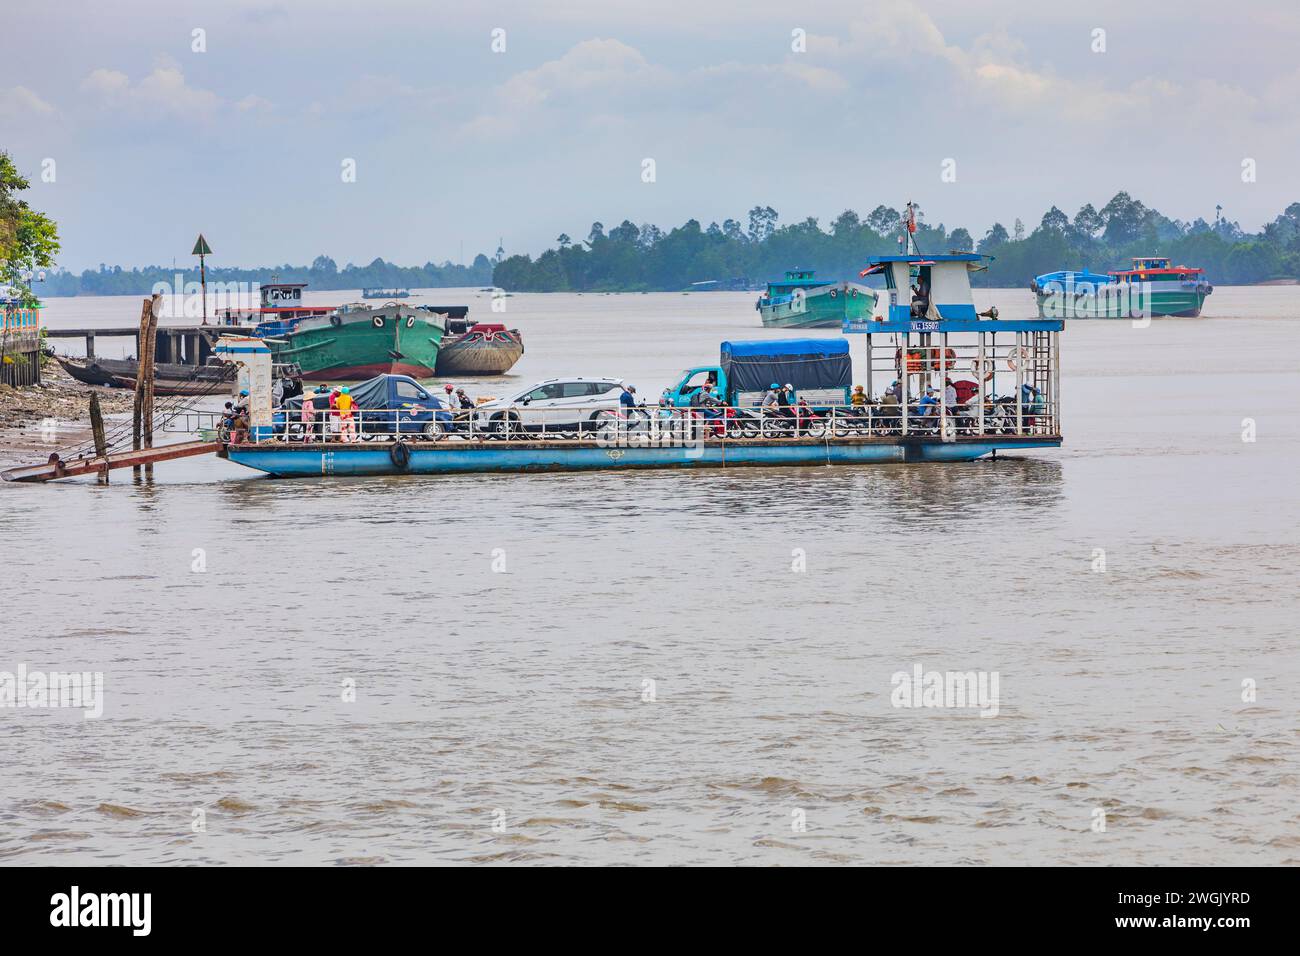 A local cross river ferry in the Mekong Delta disembarking. Stock Photo